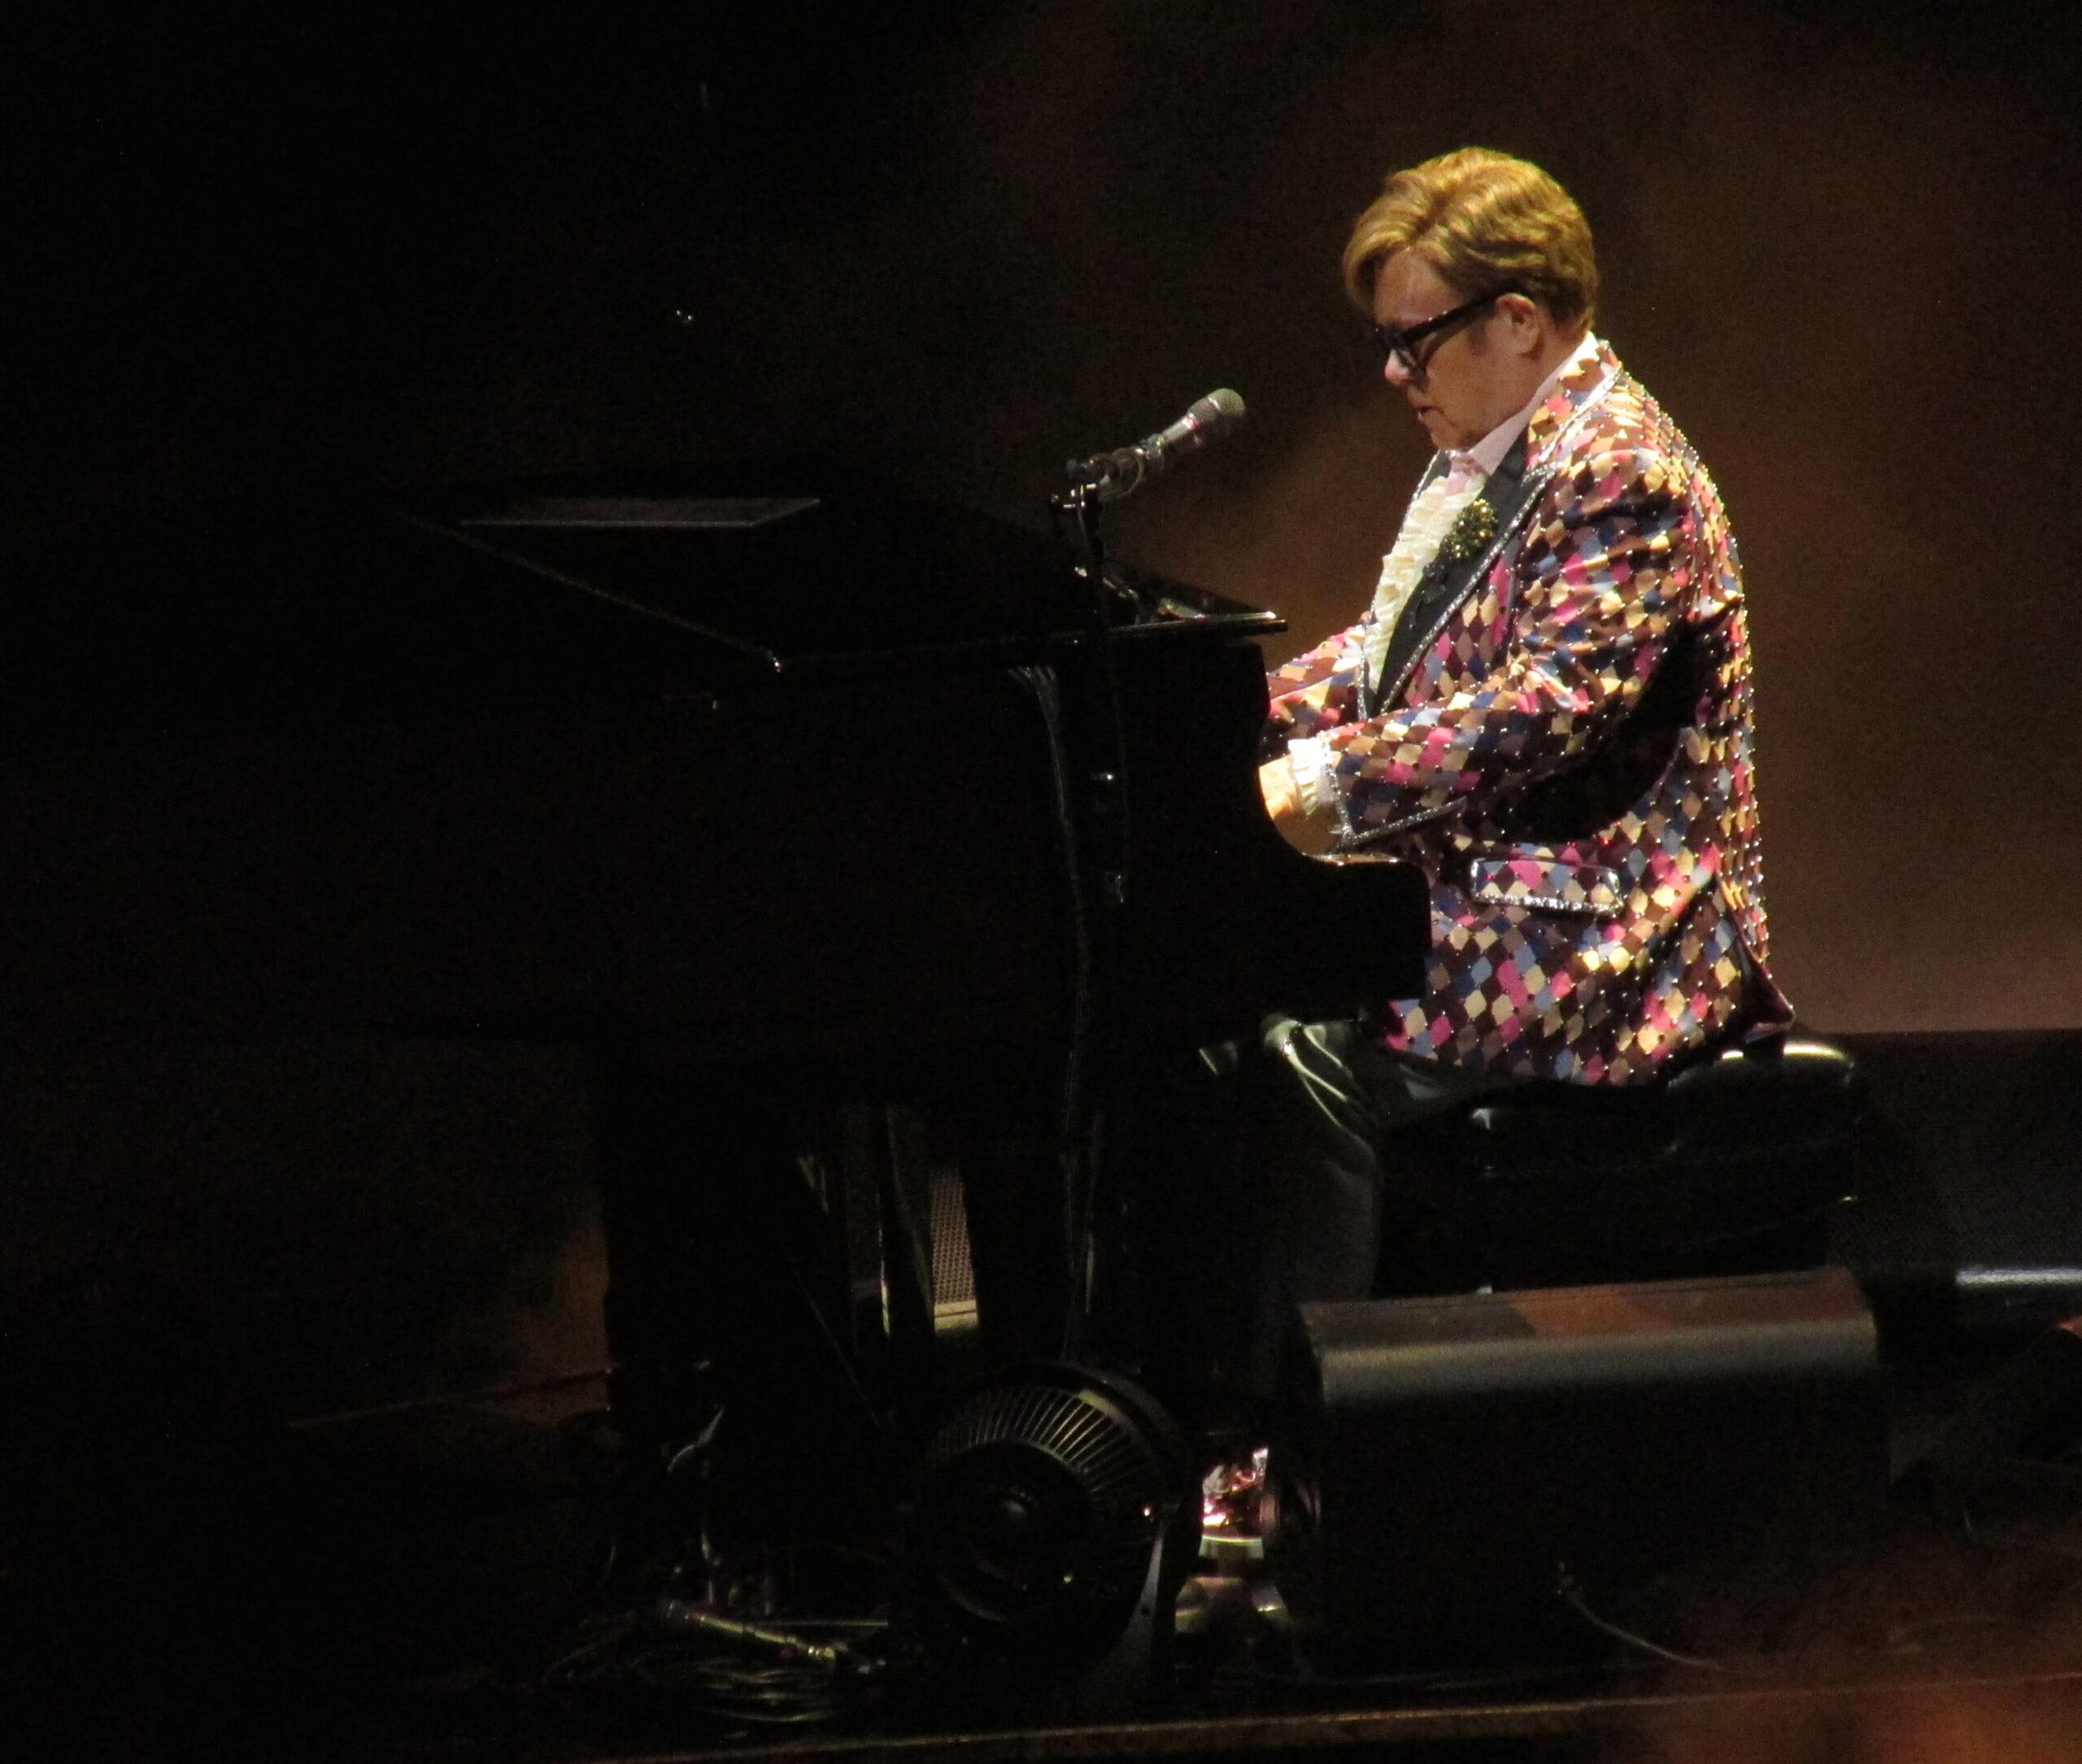 Elton John waves to the crowd as he changes three times during his finals shows in NYC